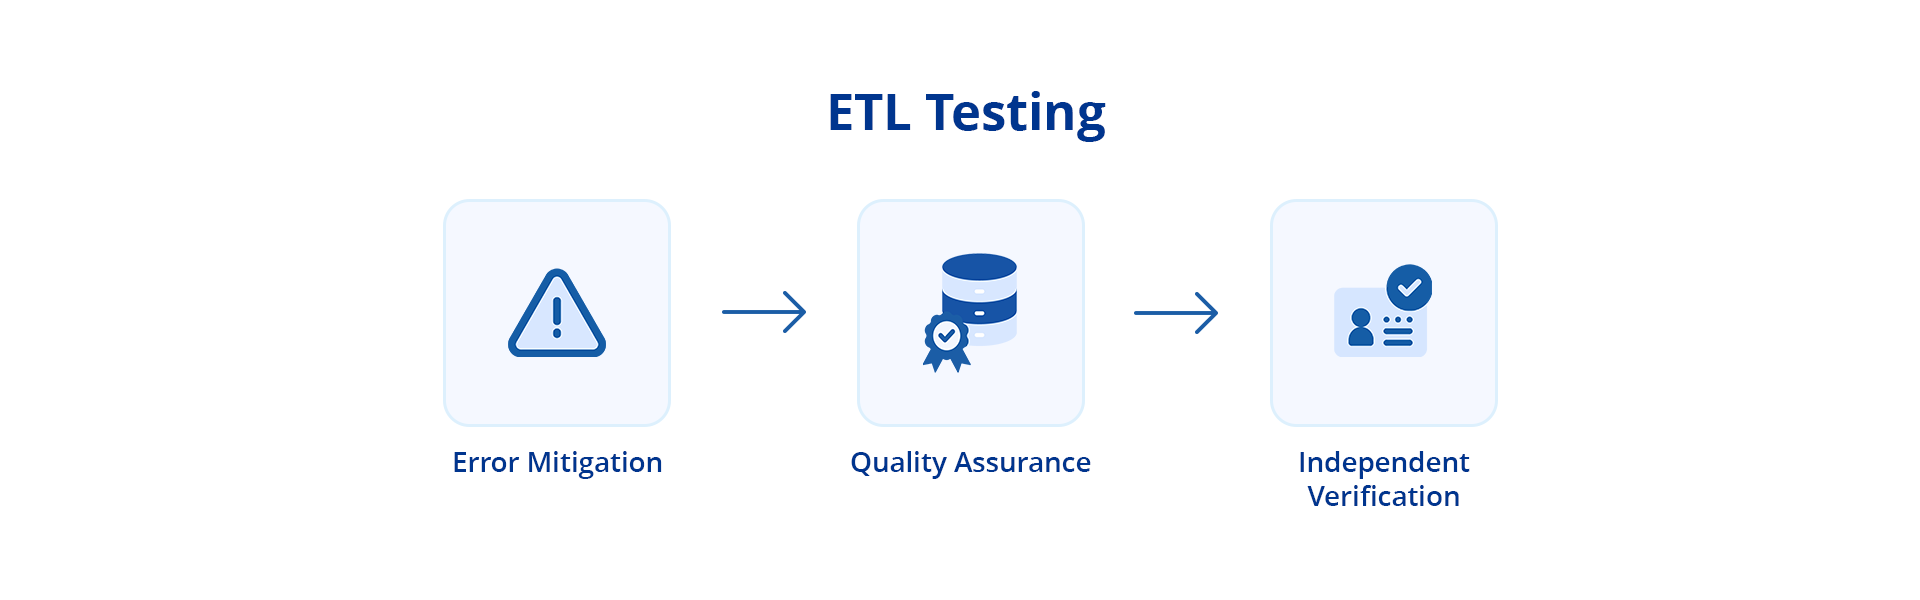 A graphic depicting the benefits of ETL testing.